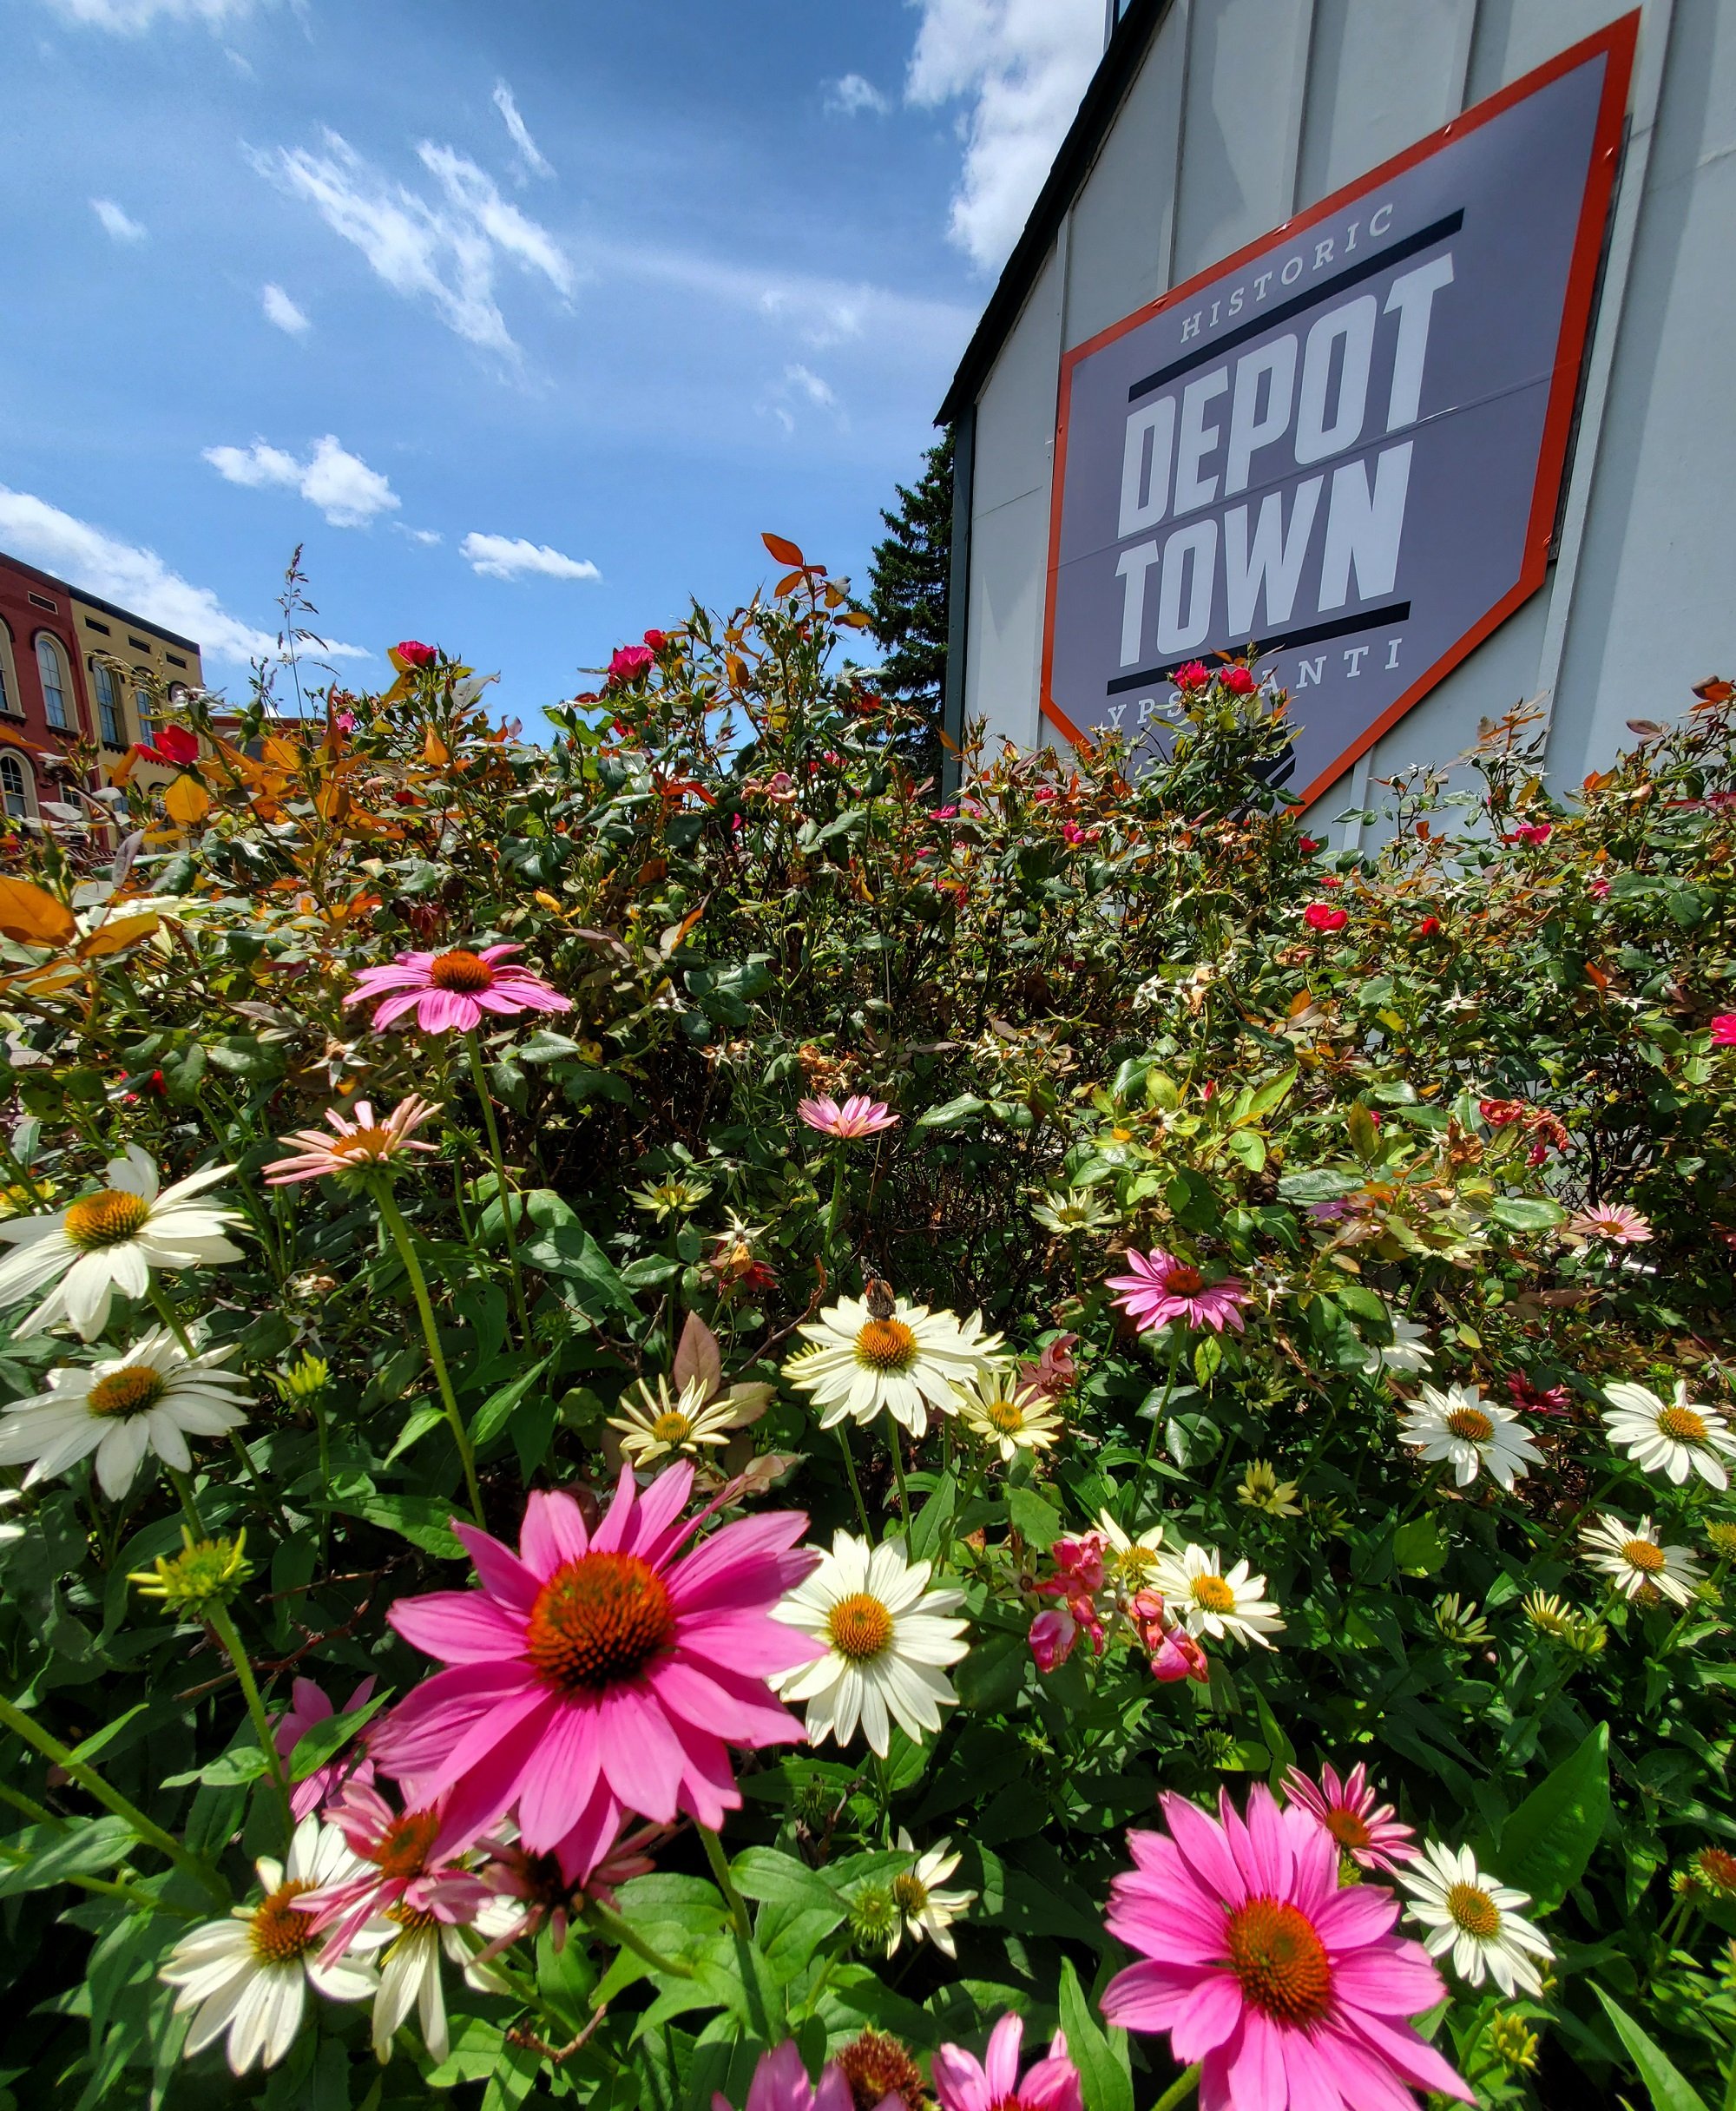 Depot town sign and flowers.jpg